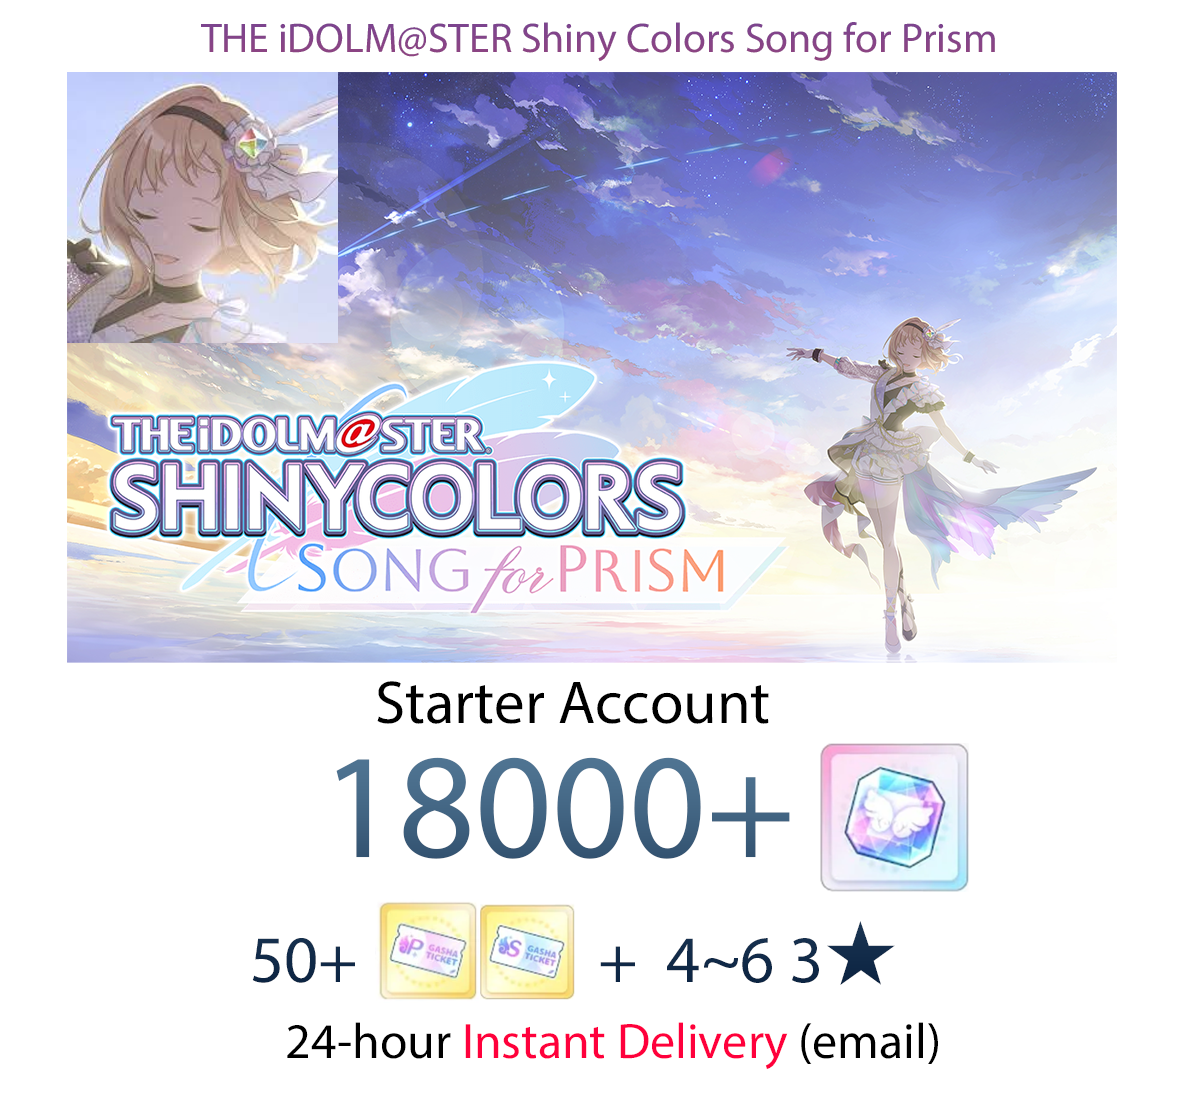 [JP] [INSTANT] 18000 Gems iDOLM@STER Shiny Colors Song for Prism Idolmaster Shanison Shinymas Starter Account